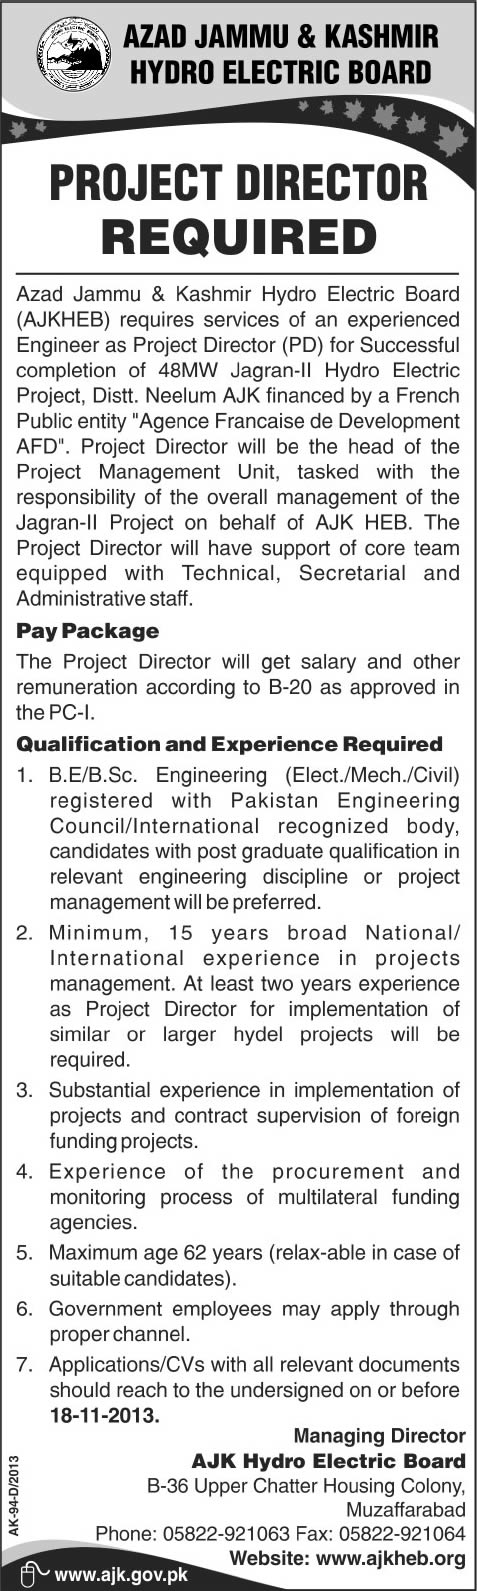 Hydro Electric Board AJK Jobs 2013 November Engineer as Project Director (PD)